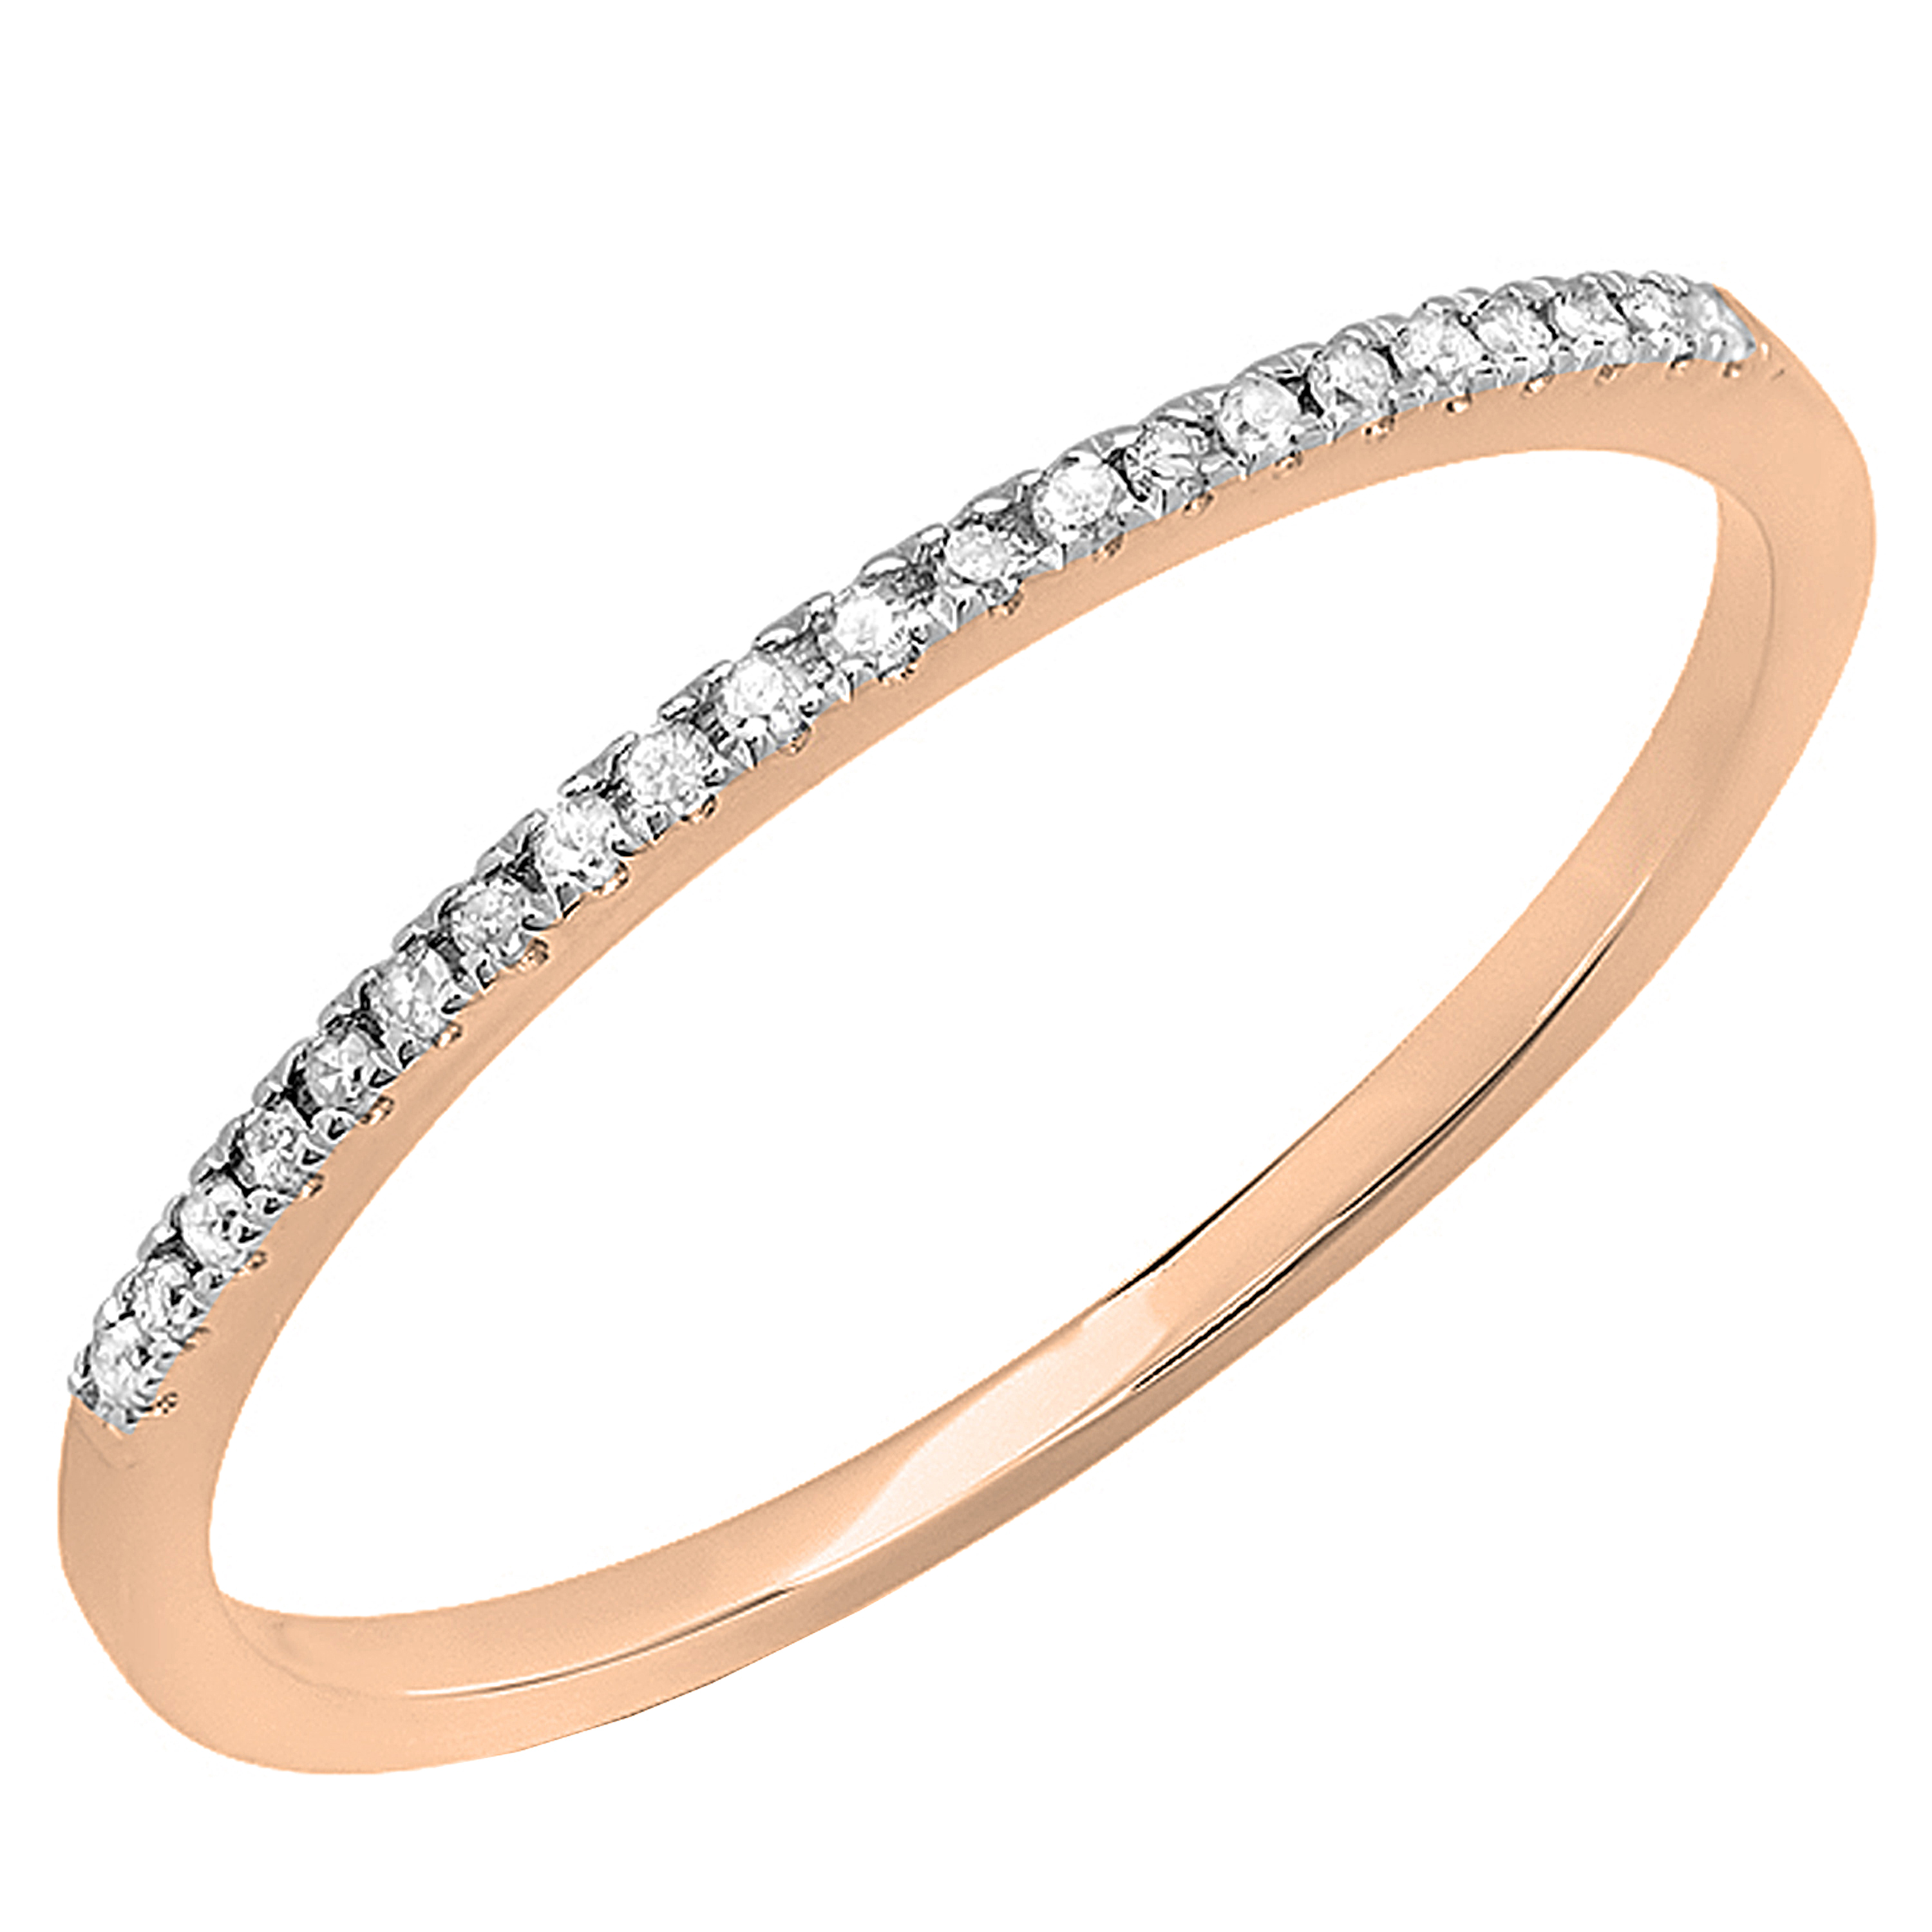 Dazzlingrock Collection Round White Diamond Single Row Stakable Wedding Band for Women (0.08 ctw, Color I-J, Clarity I2-I3) in 10K Rose Gold, Size 4 - image 1 of 10